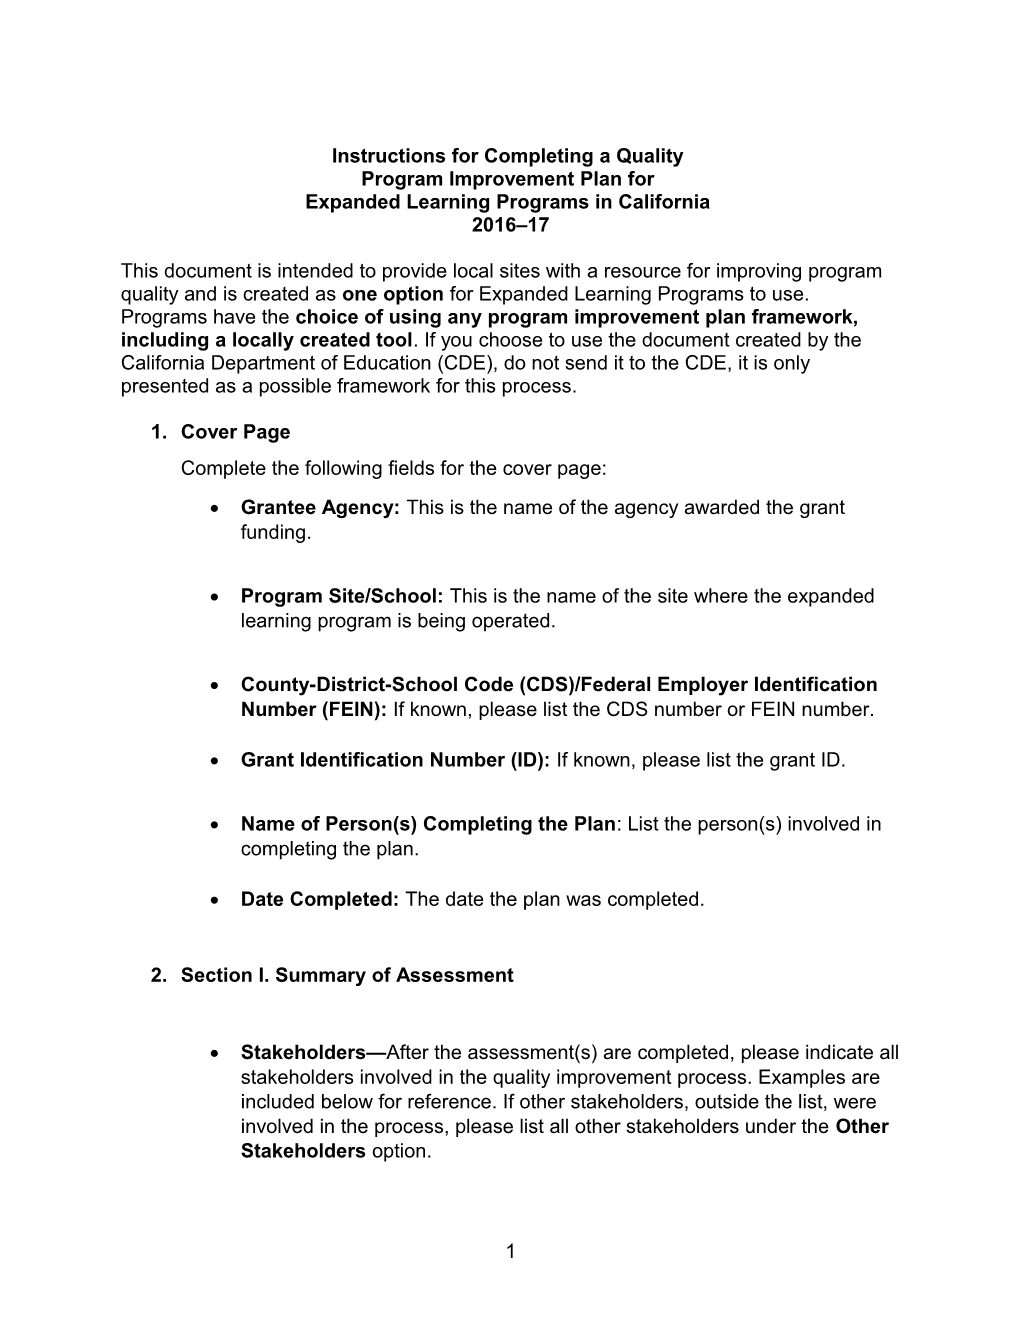 Expanded Learning - Quality Improvement Plan Instructions (CA Dept of Education)